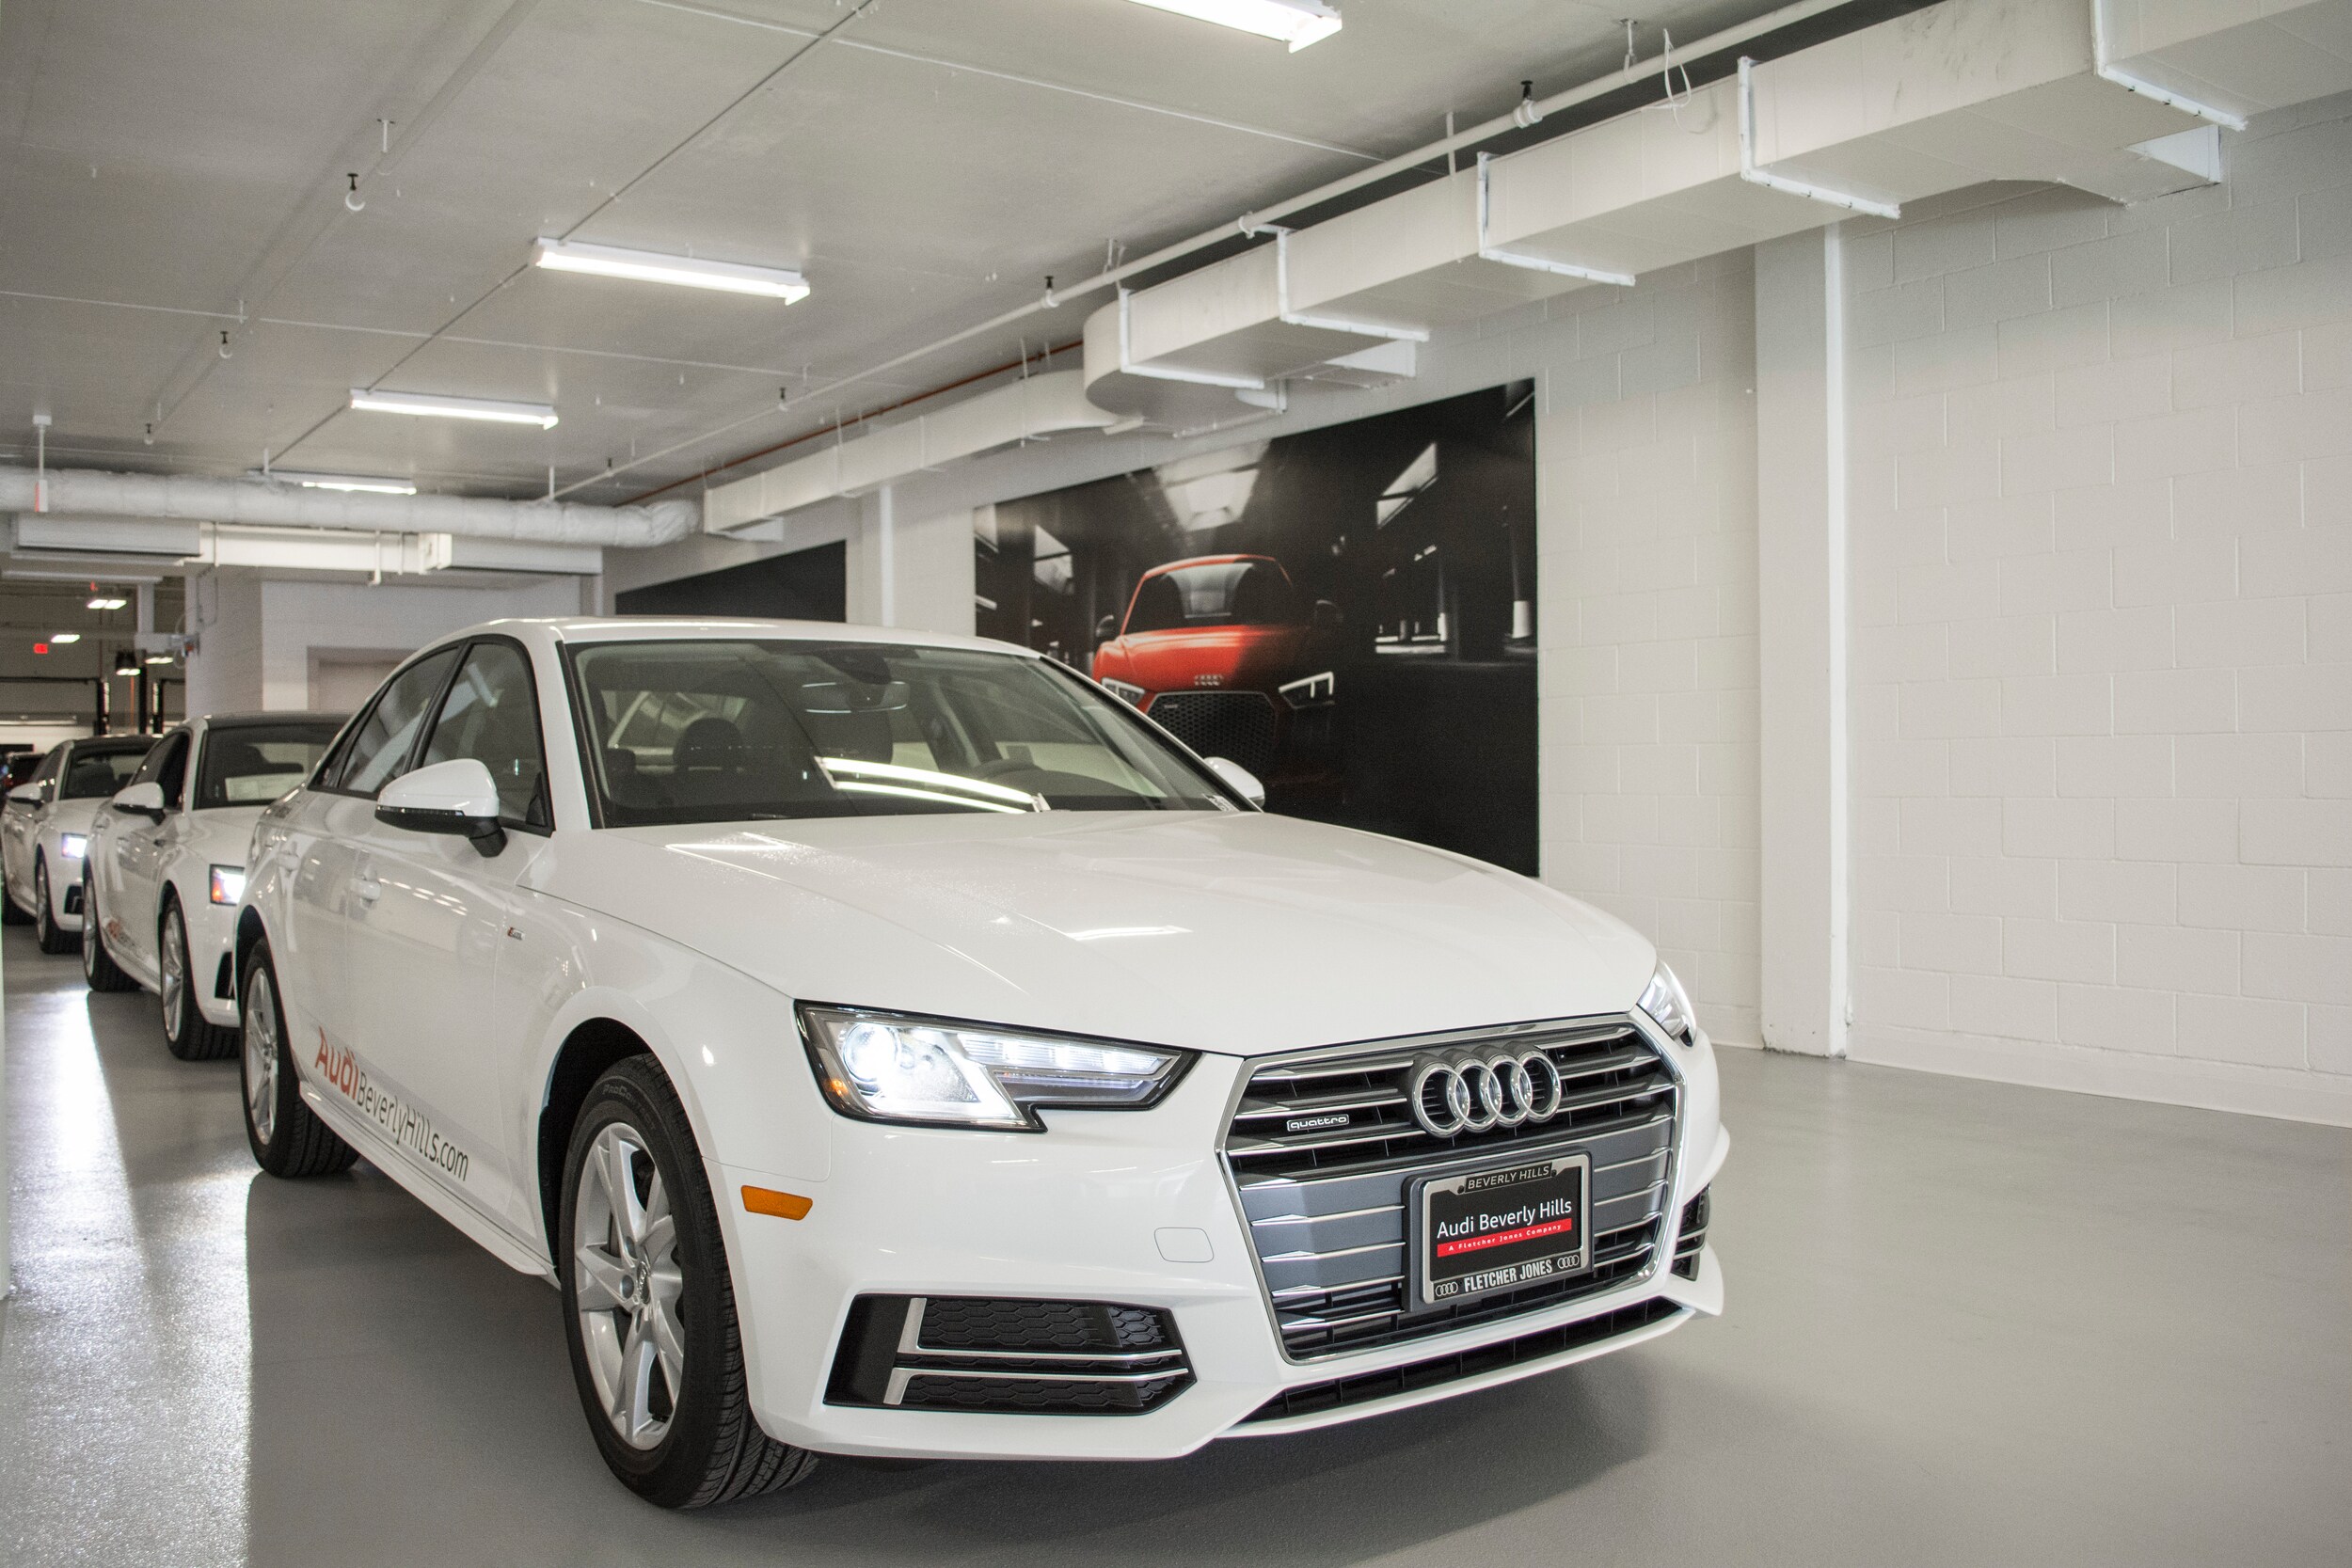 Audi Fairfax Service Center 5 Things To Look Forward To